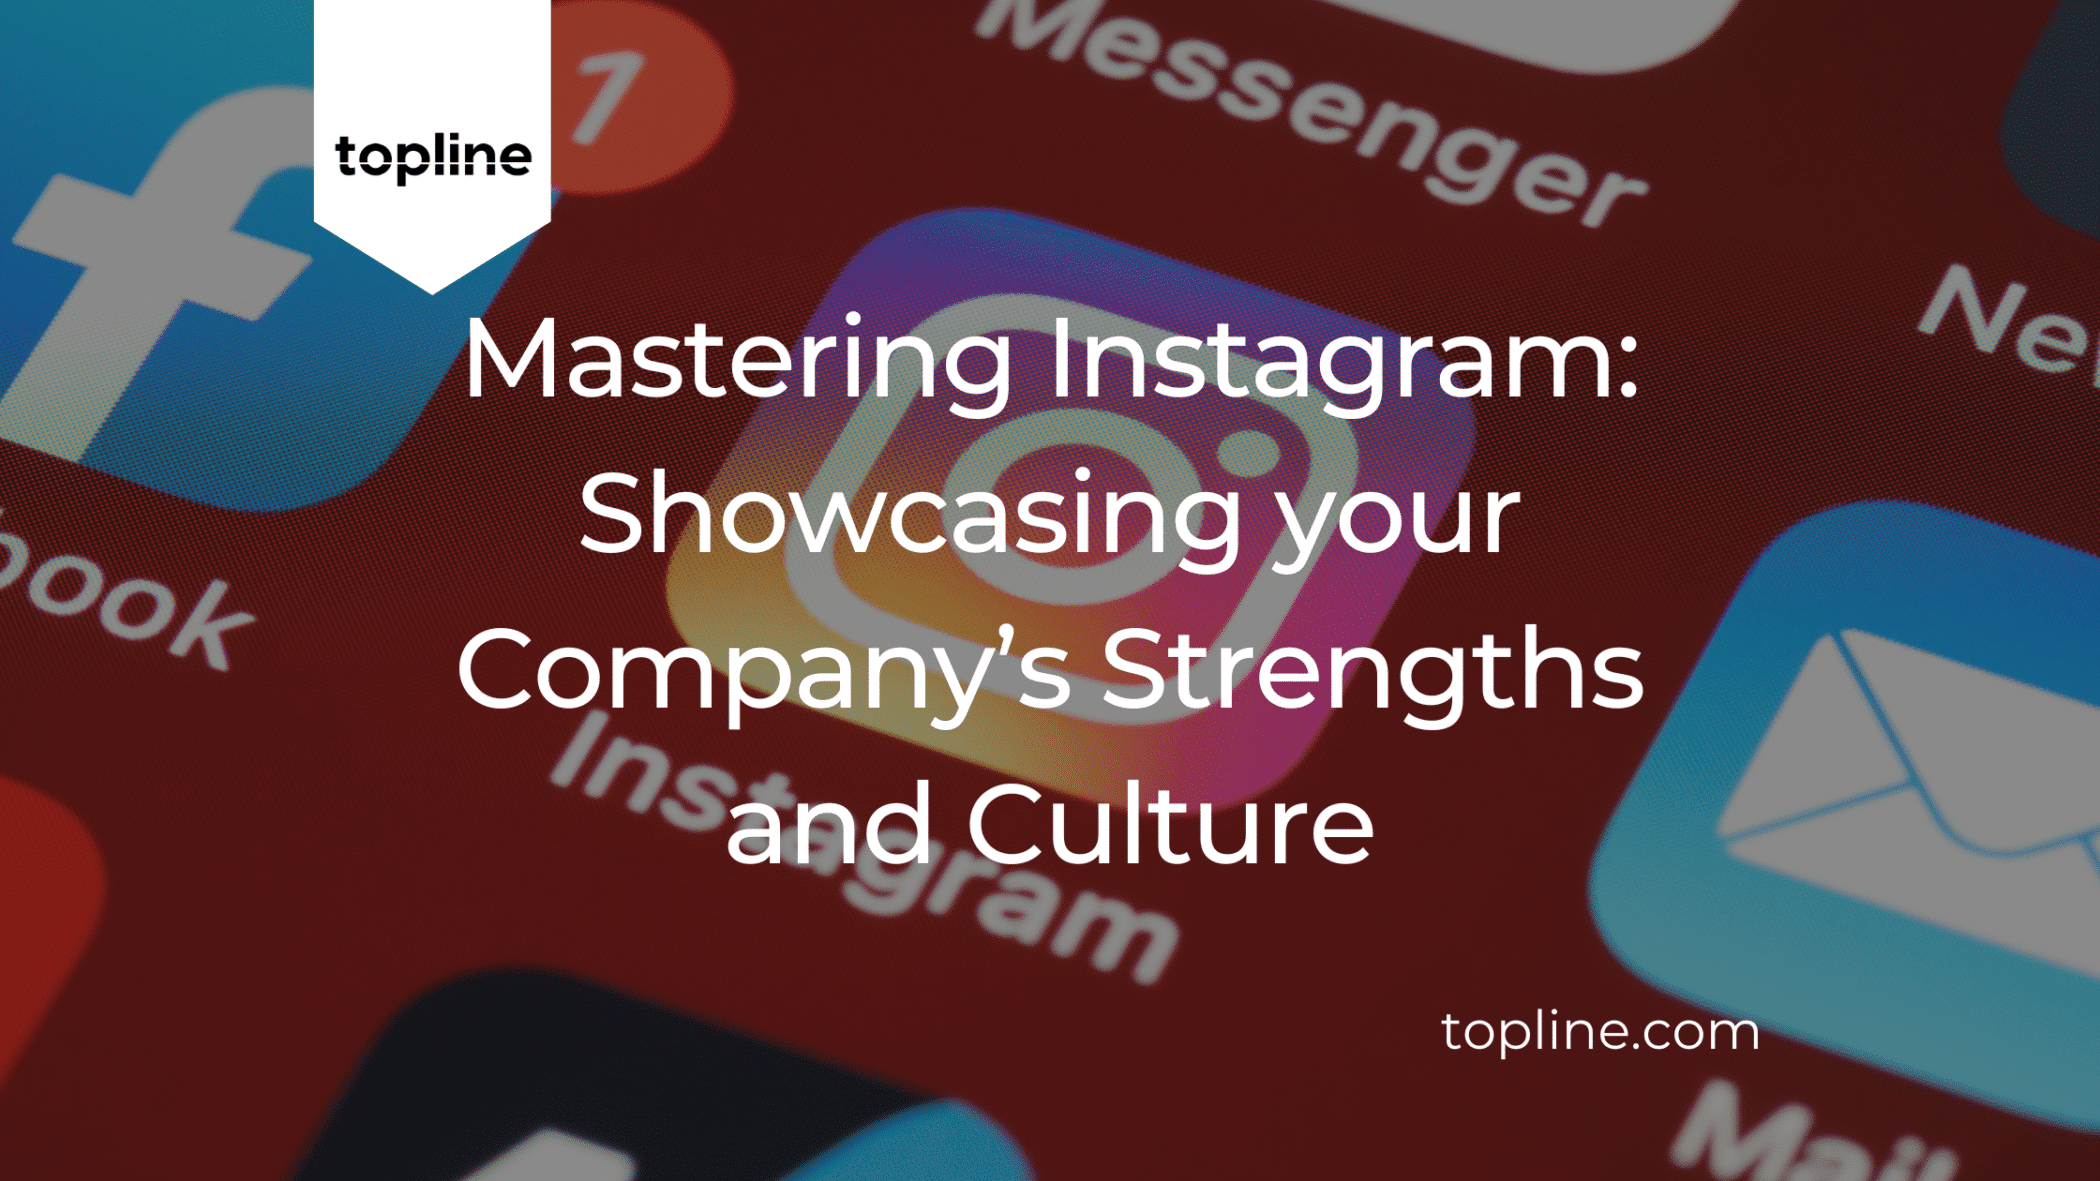 Mastering Instagram: Showcasing your Company’s Strengths and Culture